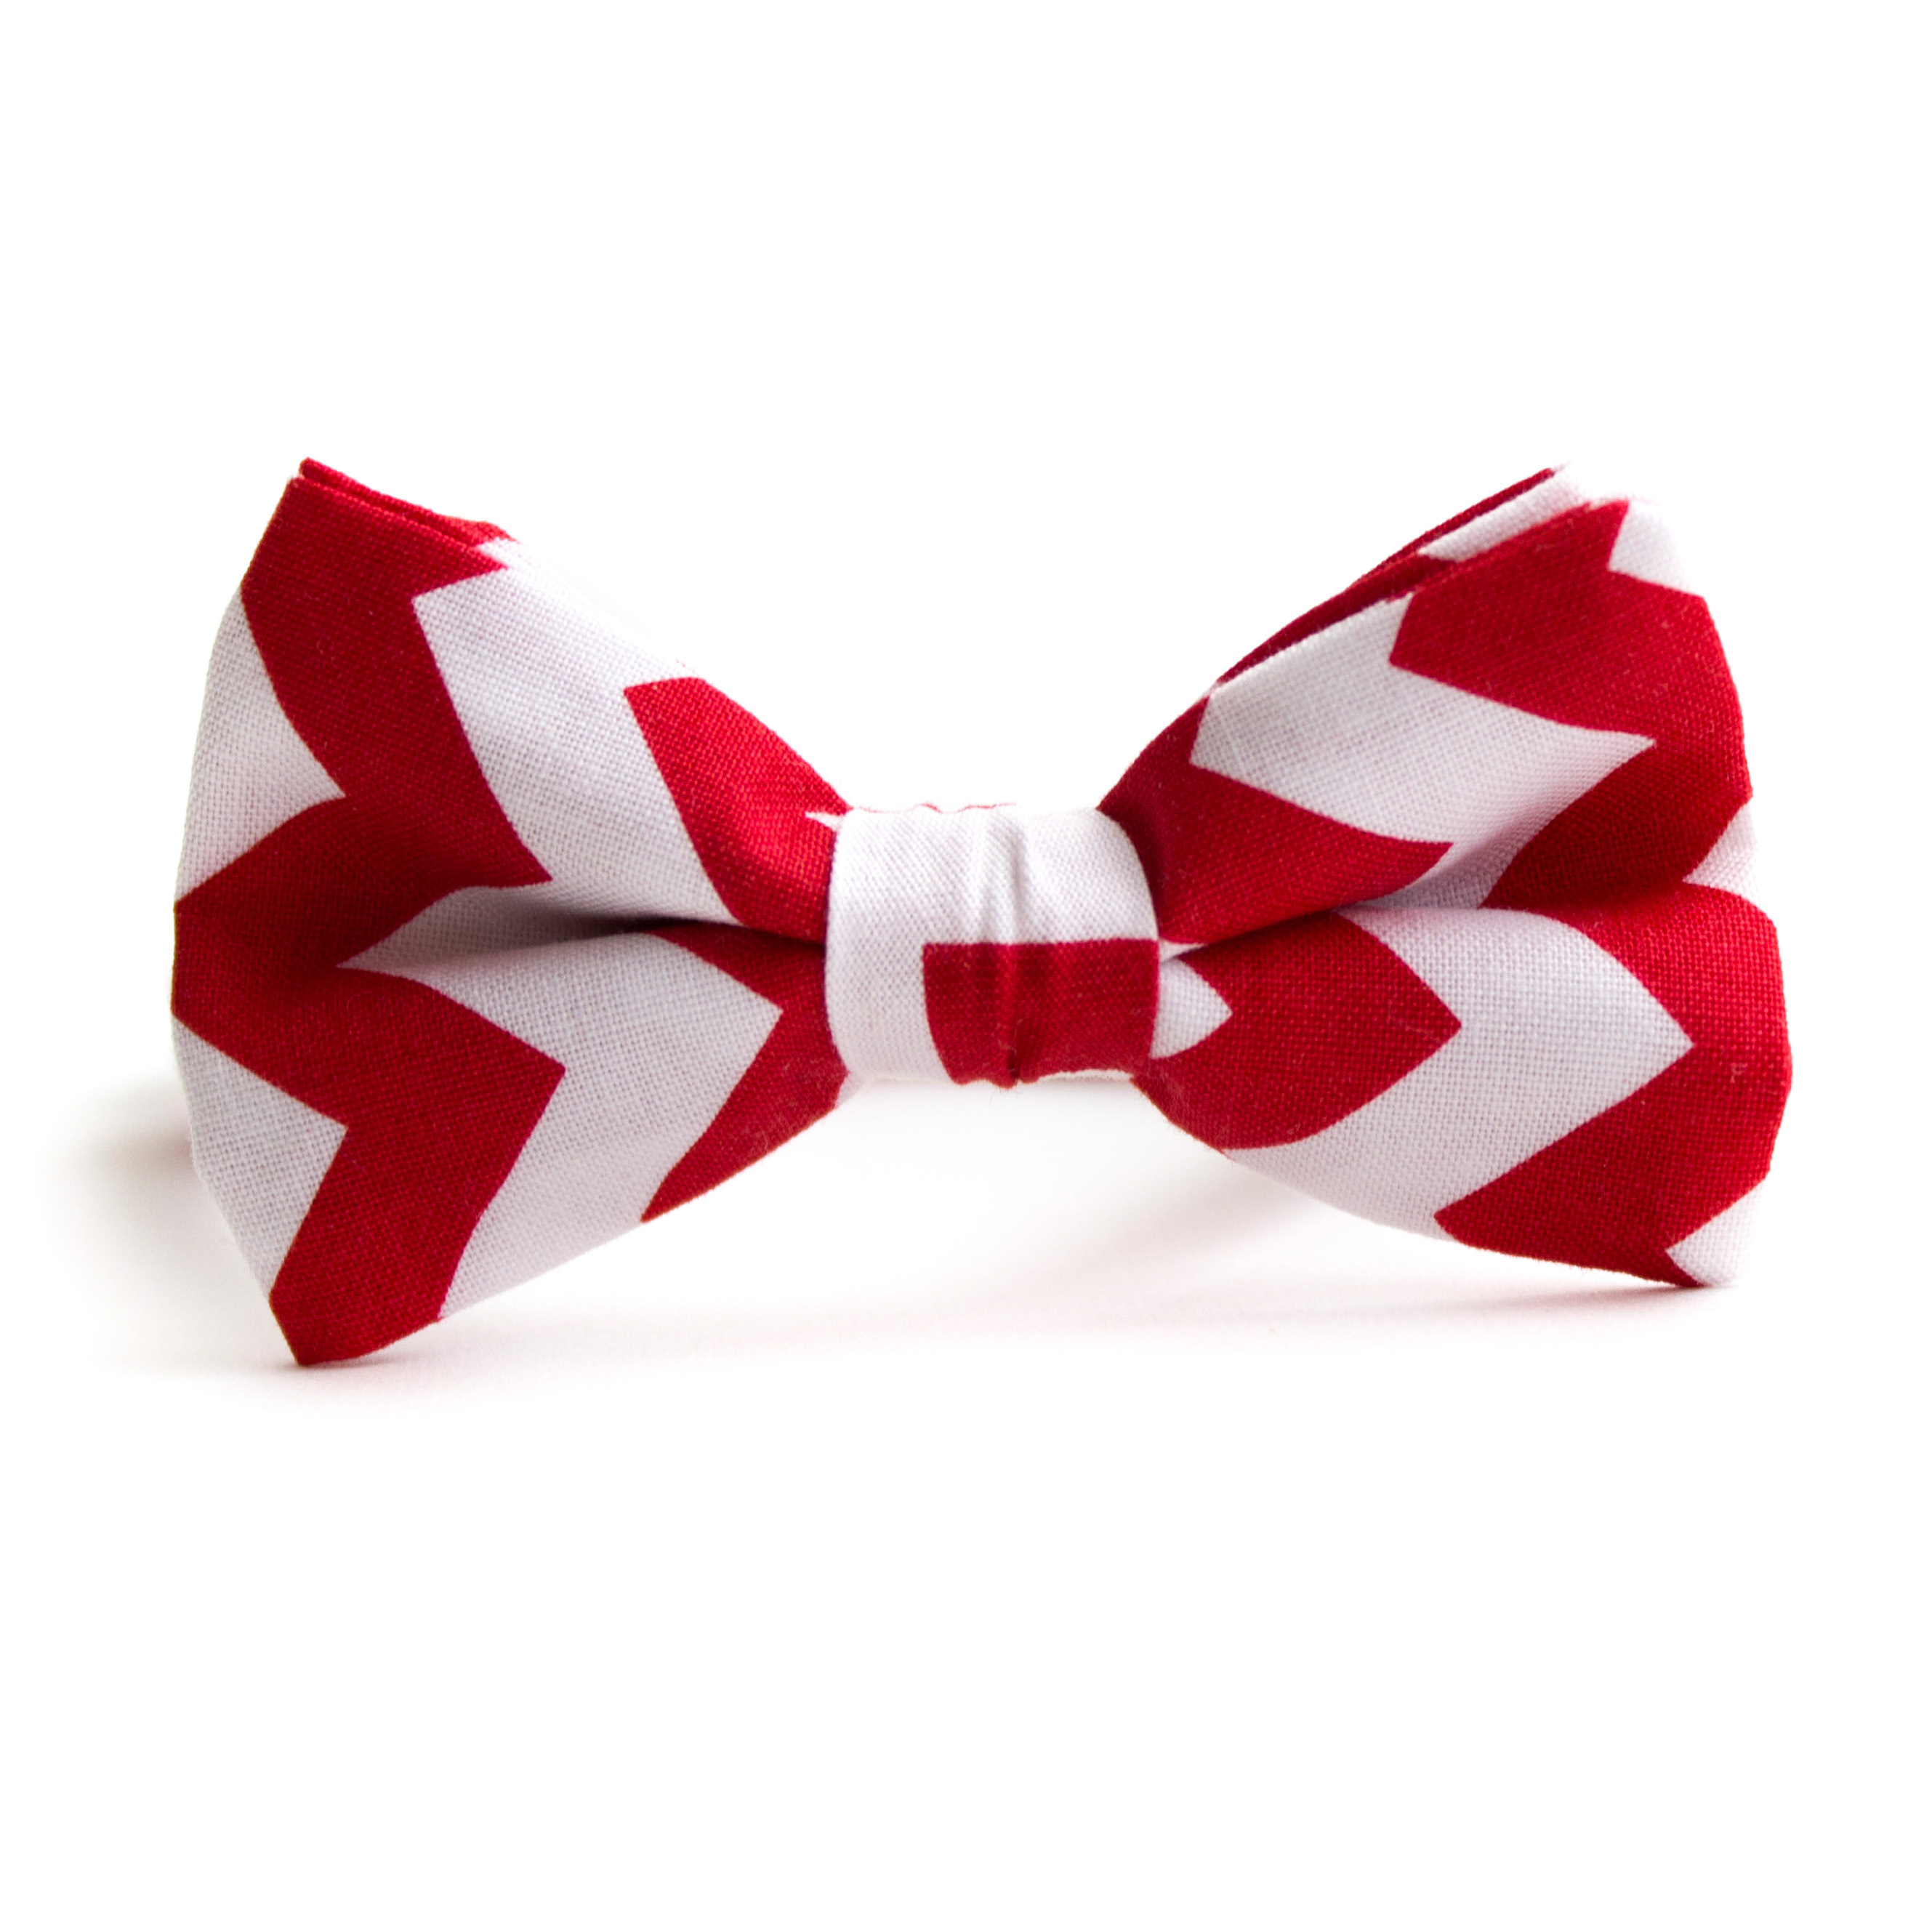 Best Photos of Red Bow Ties - Red Dot Bow Tie, Red Bow Tie and Red ...